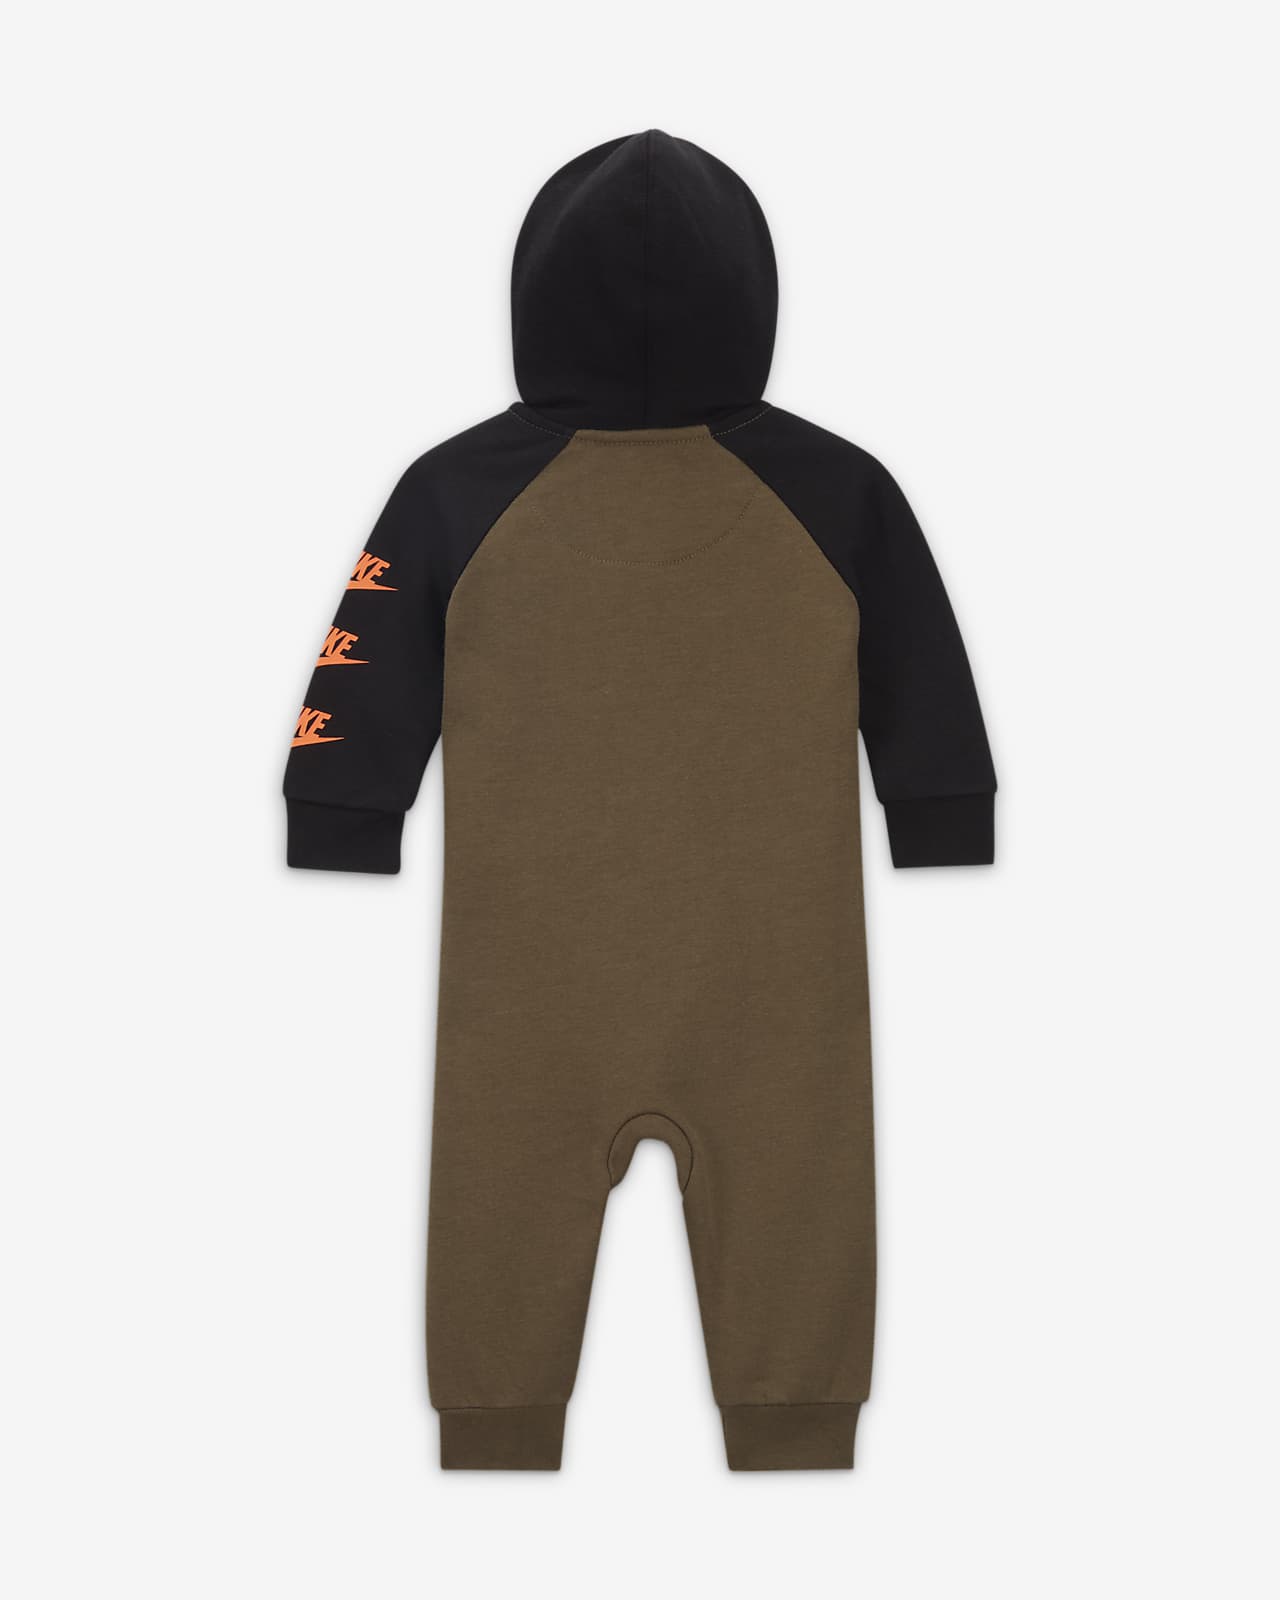 Nike Sportswear Baby (0-9M) Hooded Coverall.